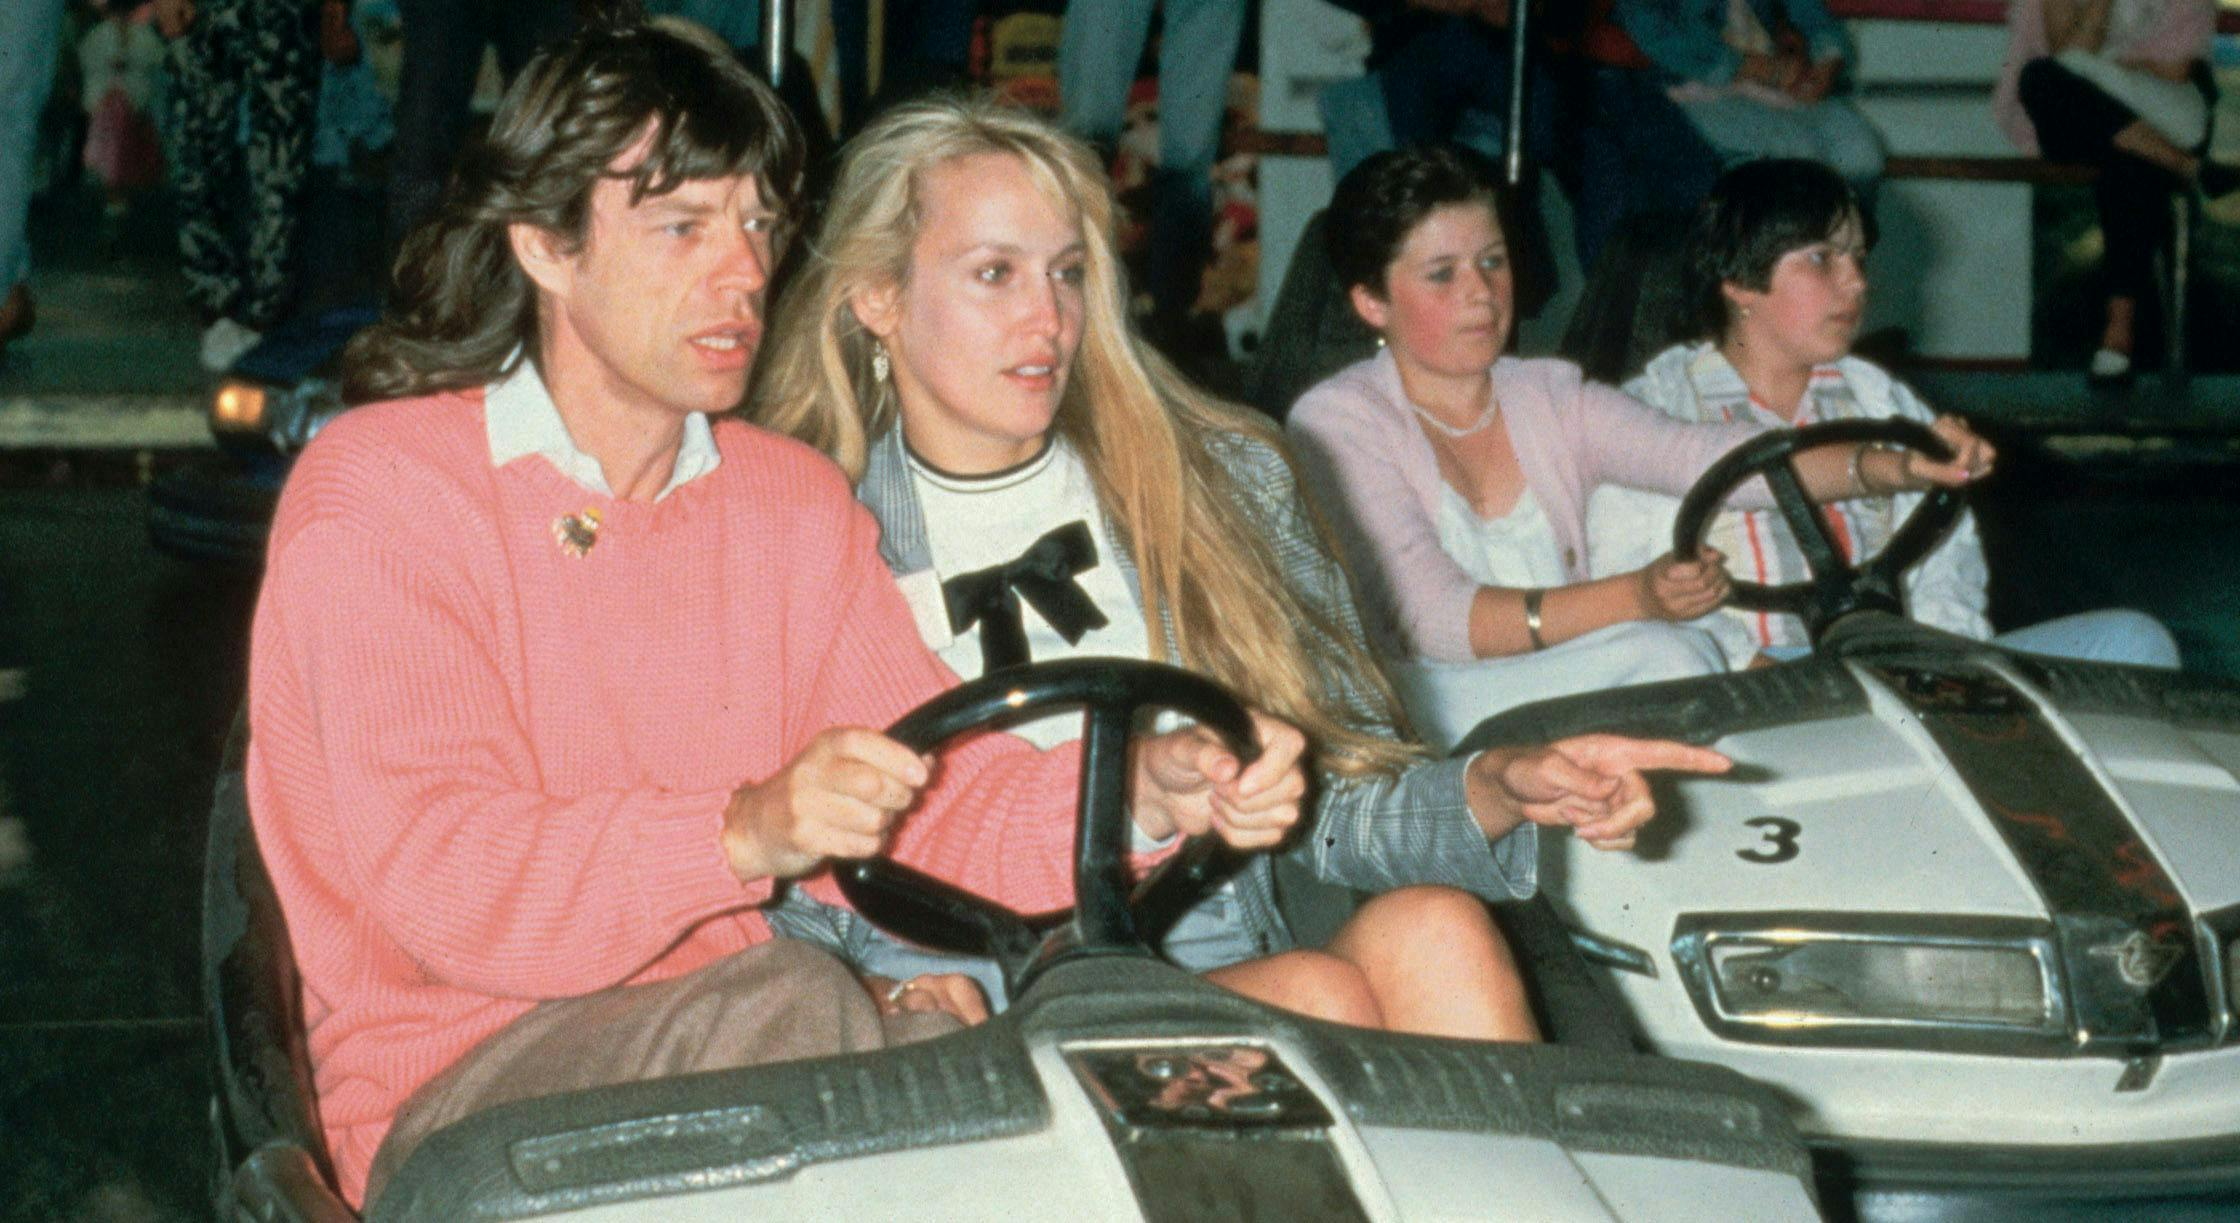 men bumper cars english group of people women recreation girl music mick jagger jerry hall festival american rock music couples caucasian ethnicity prominent persons rolling stones child driving boy person human transportation kart vehicle